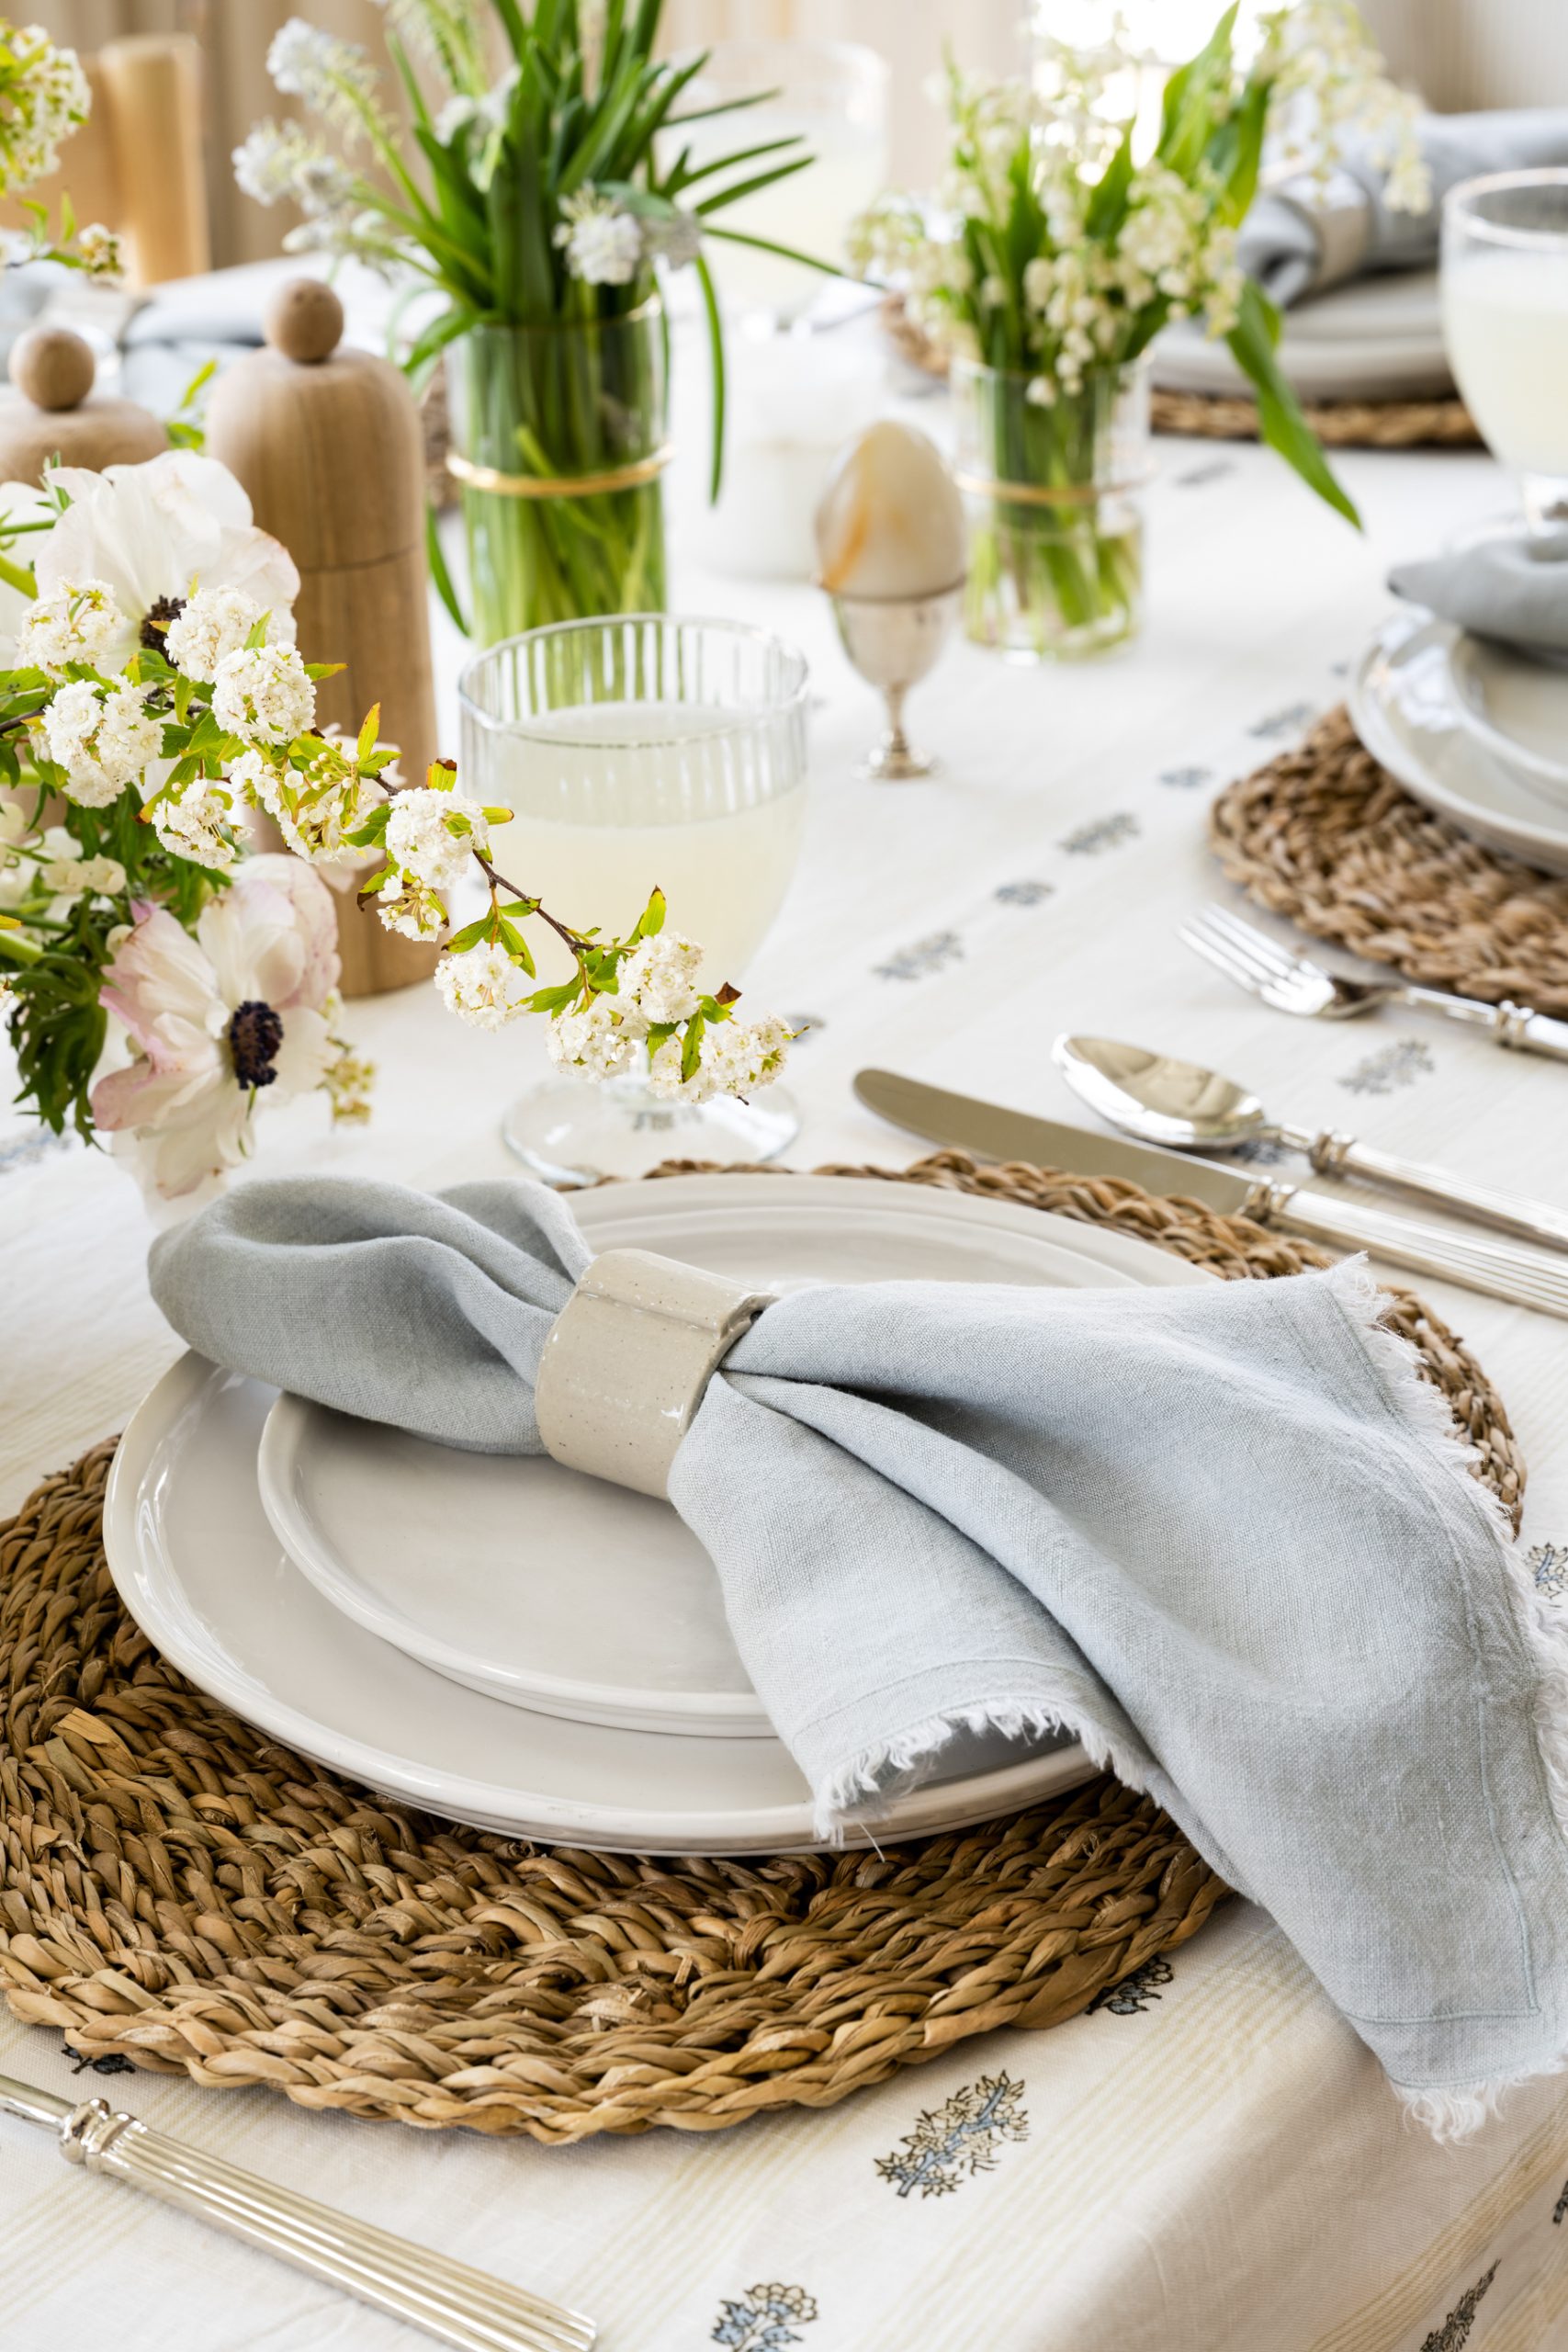 white ribbed plate on seagrass placemat on tan floral tablecloth